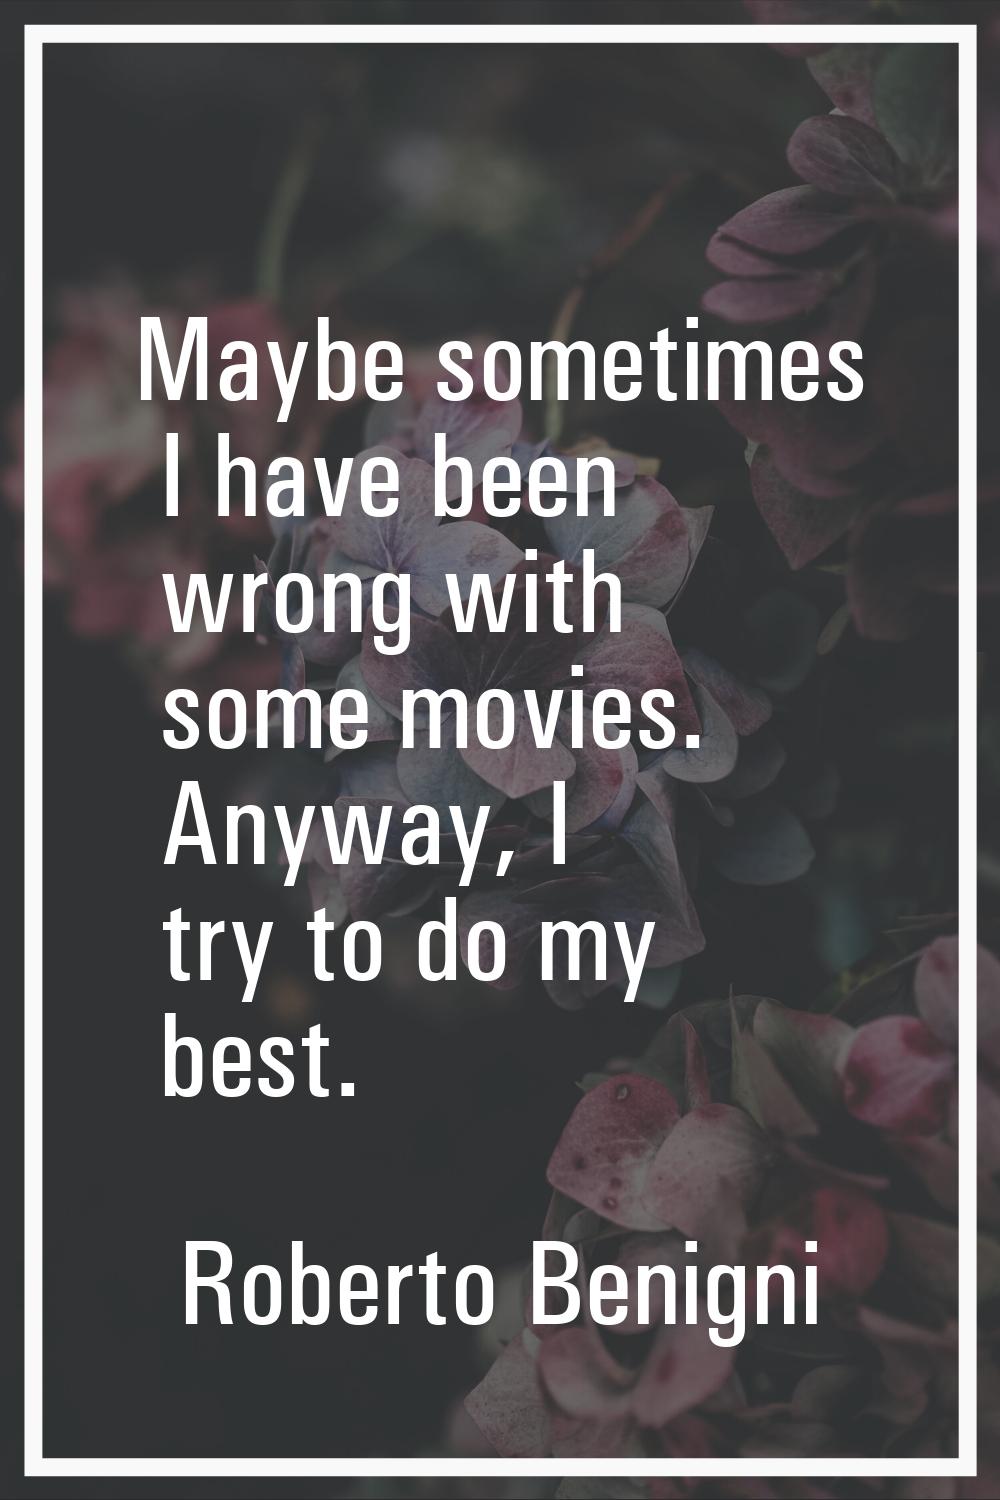 Maybe sometimes I have been wrong with some movies. Anyway, I try to do my best.